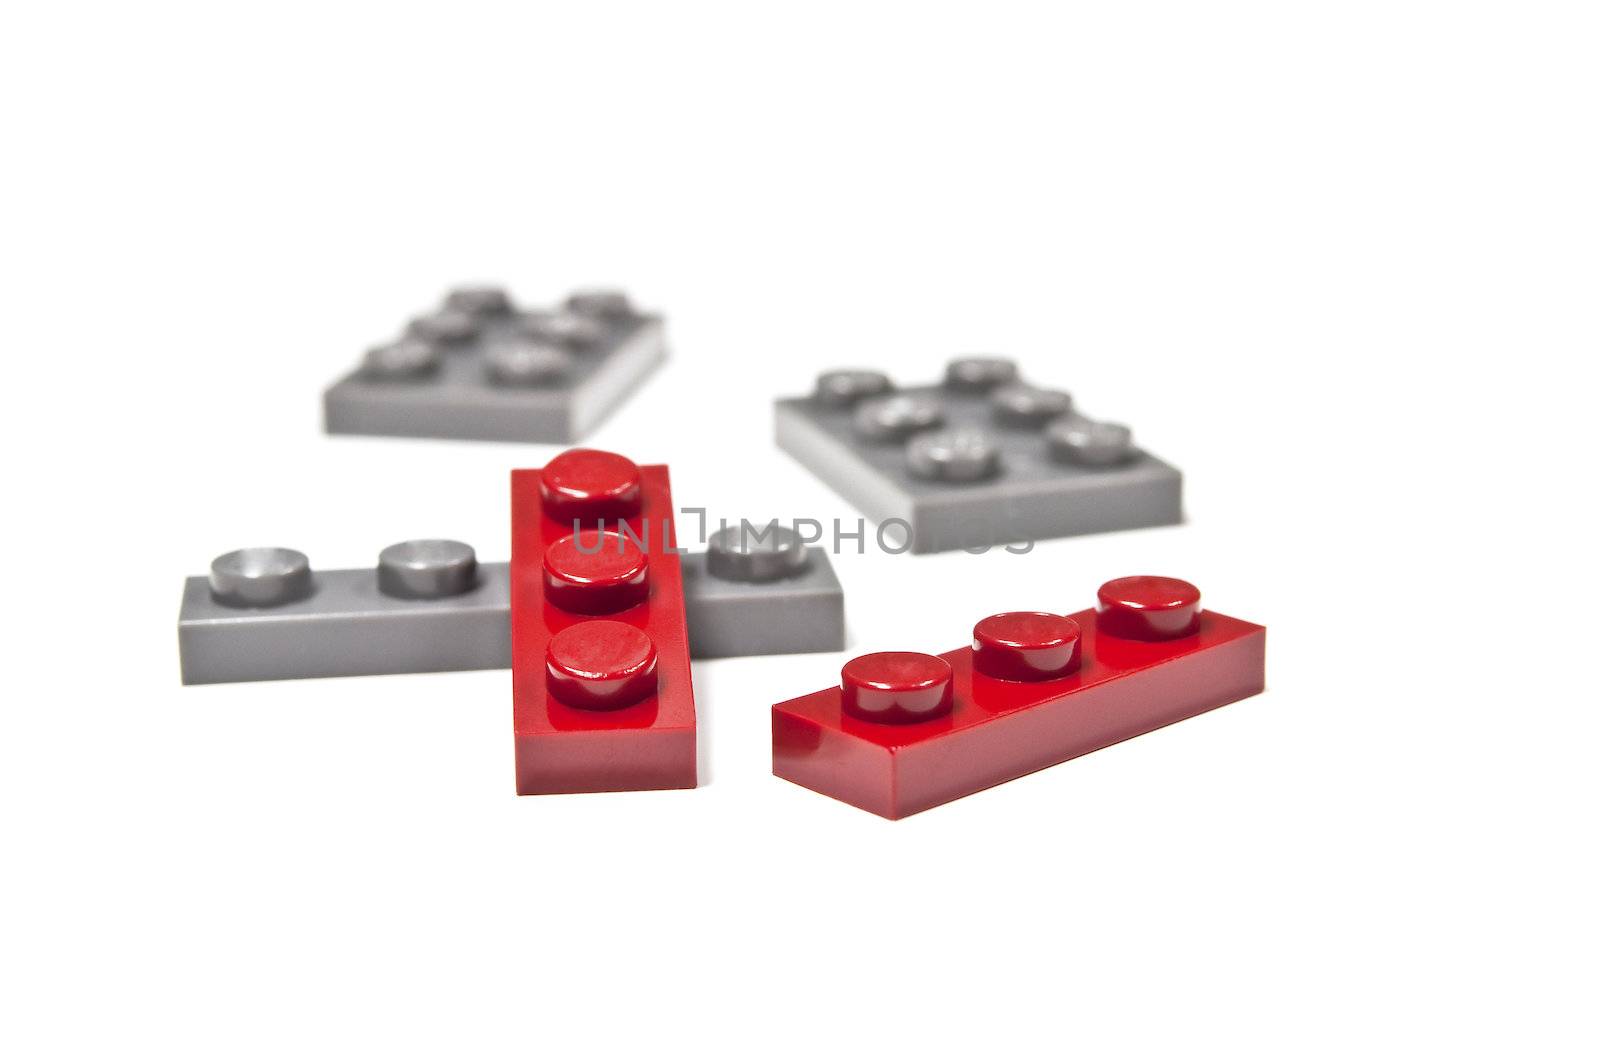 Display of isolated building blocks on white background.